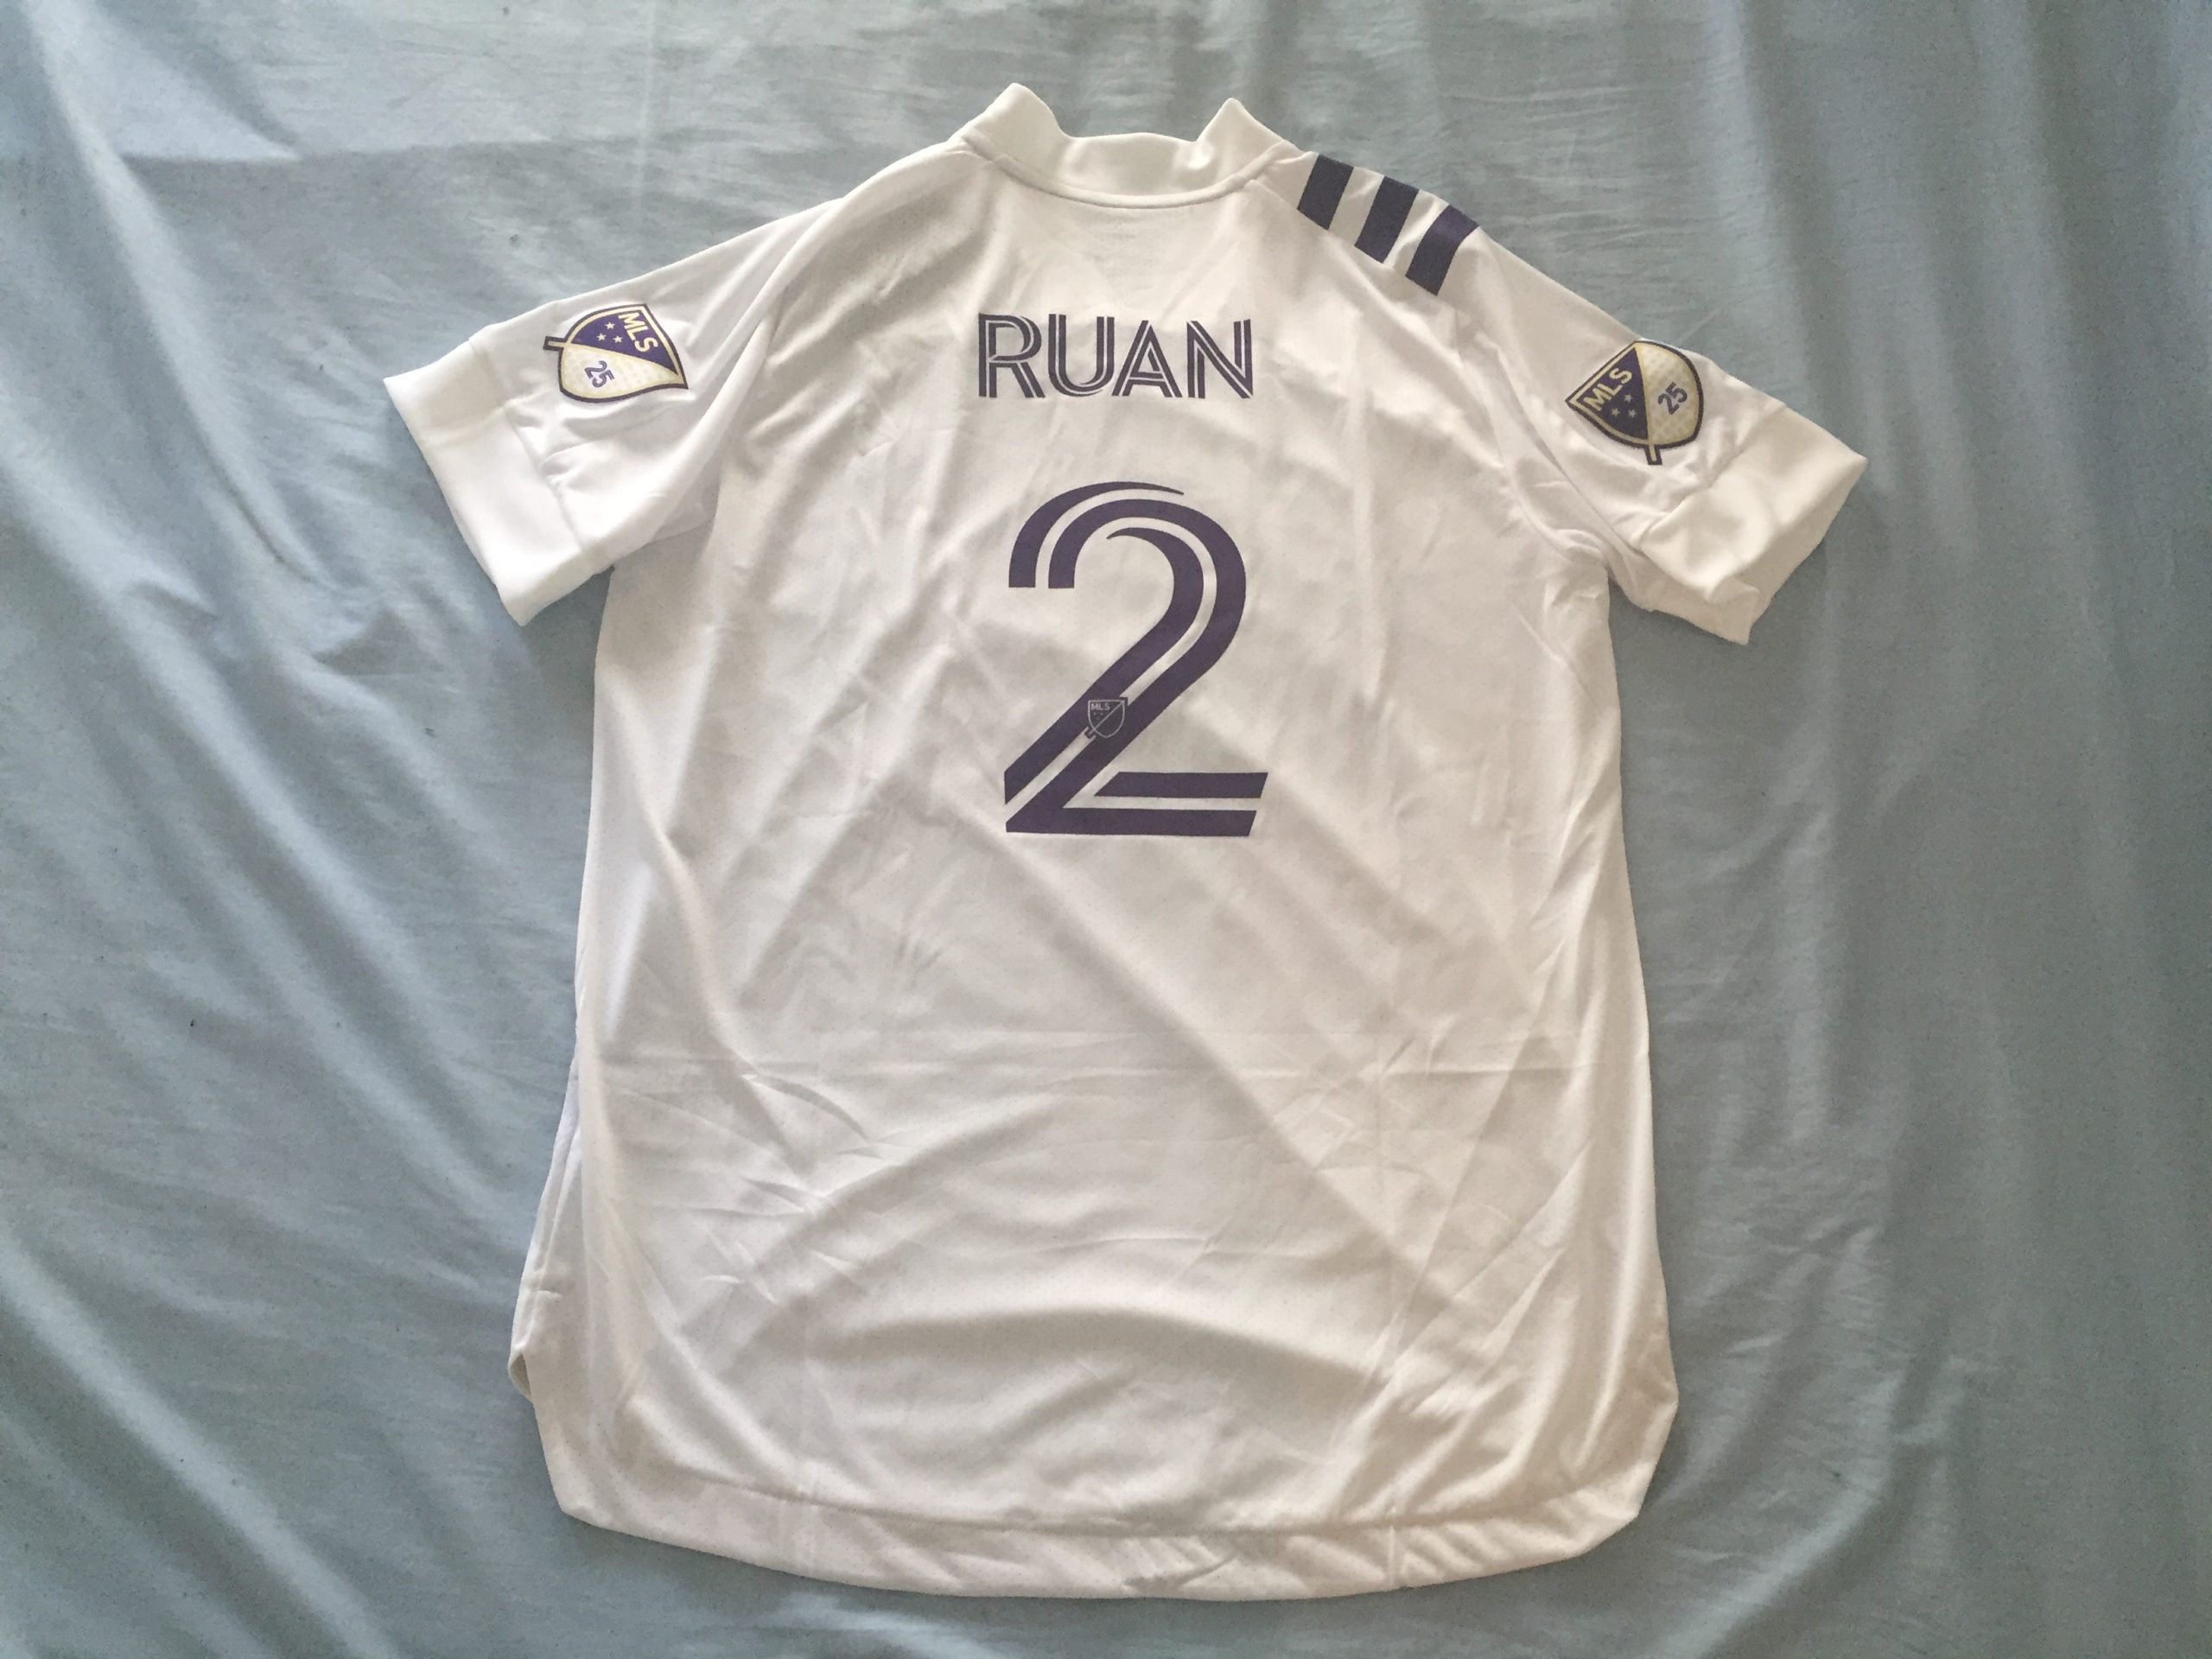 2020 Orlando City SC jersey - The Heart and Sol kit